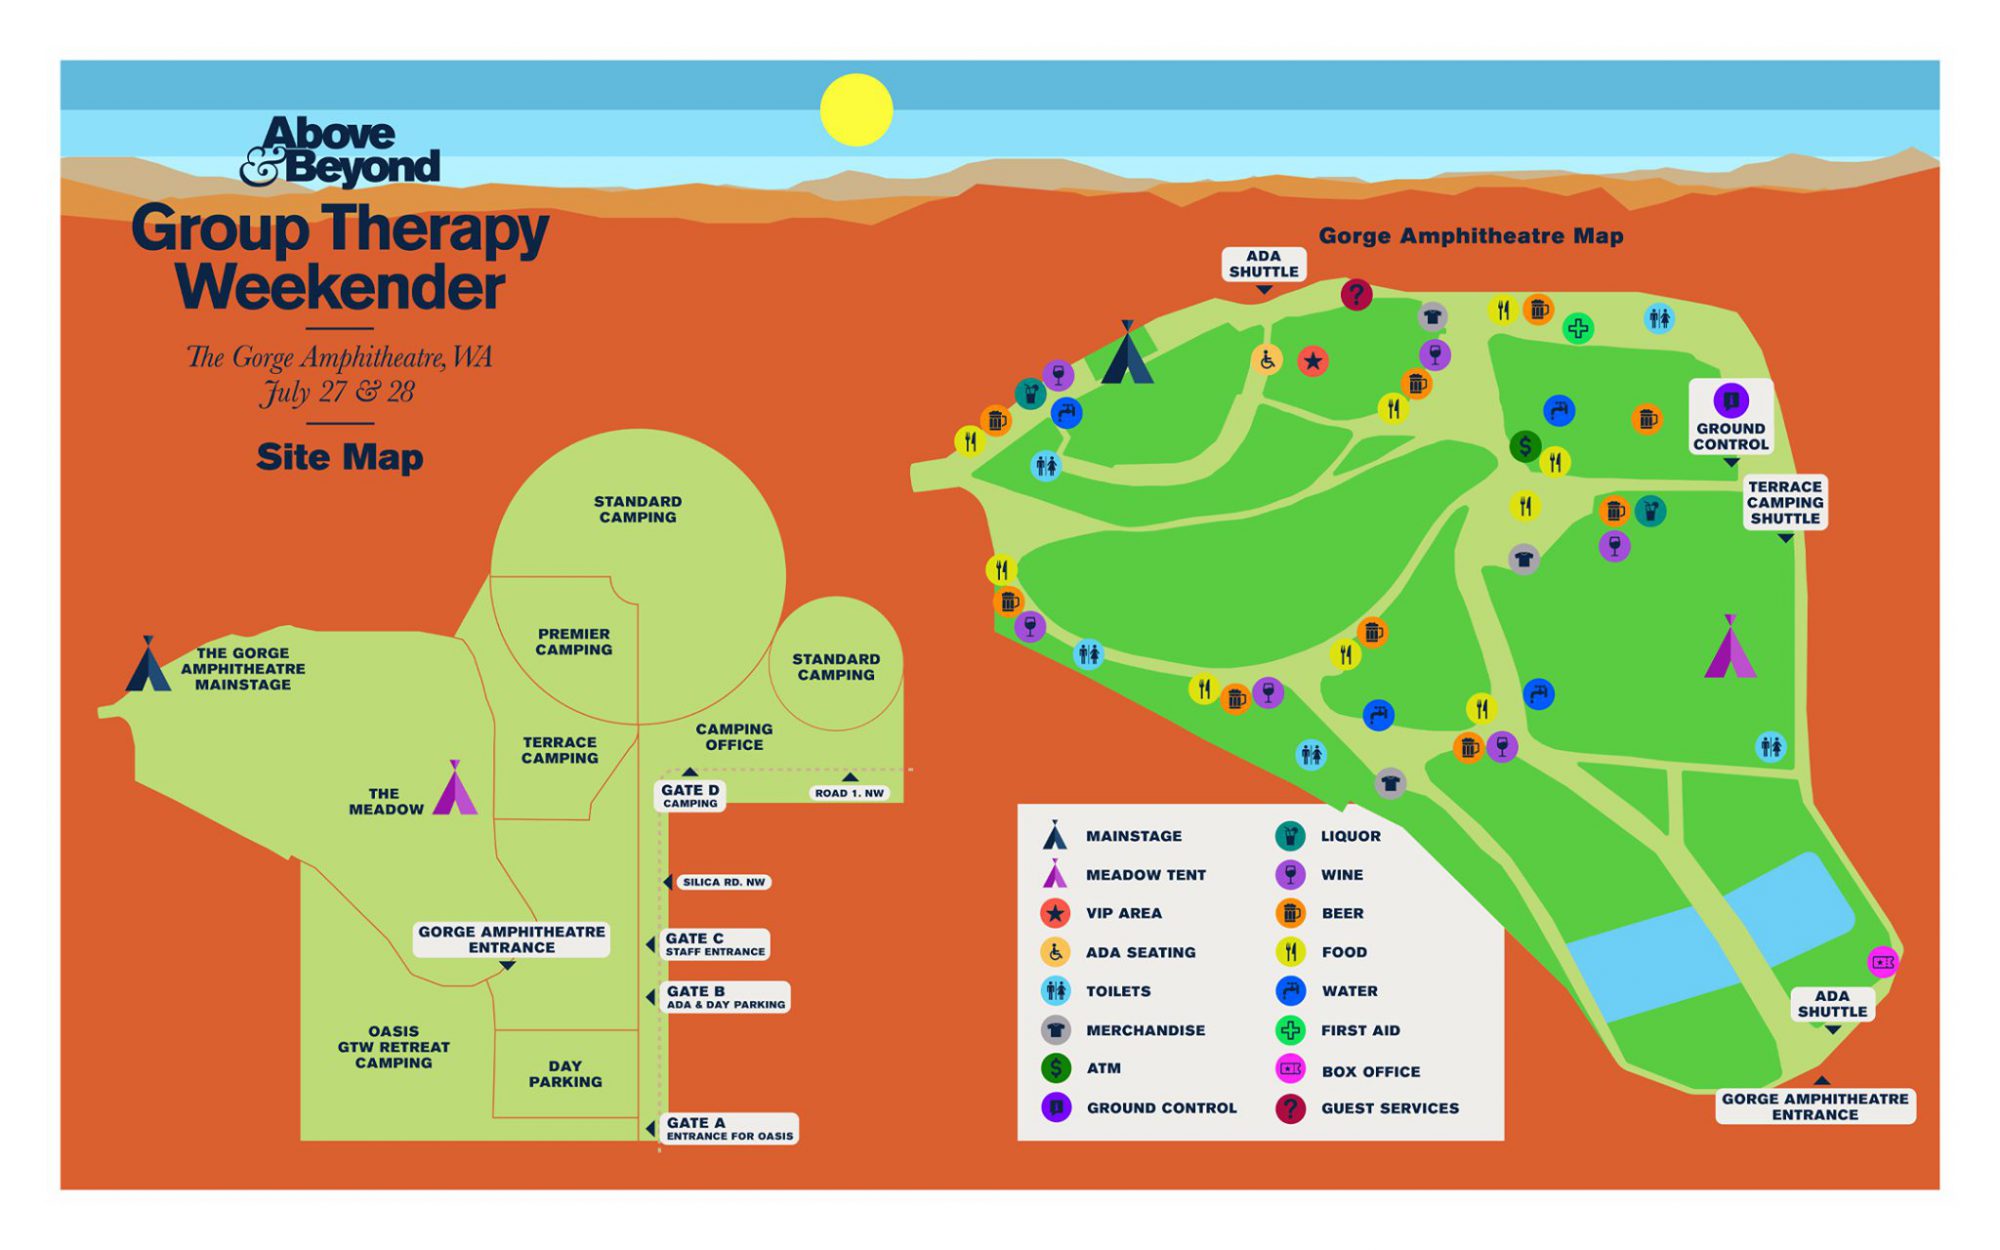 Group Therapy Weekender 2019 Map